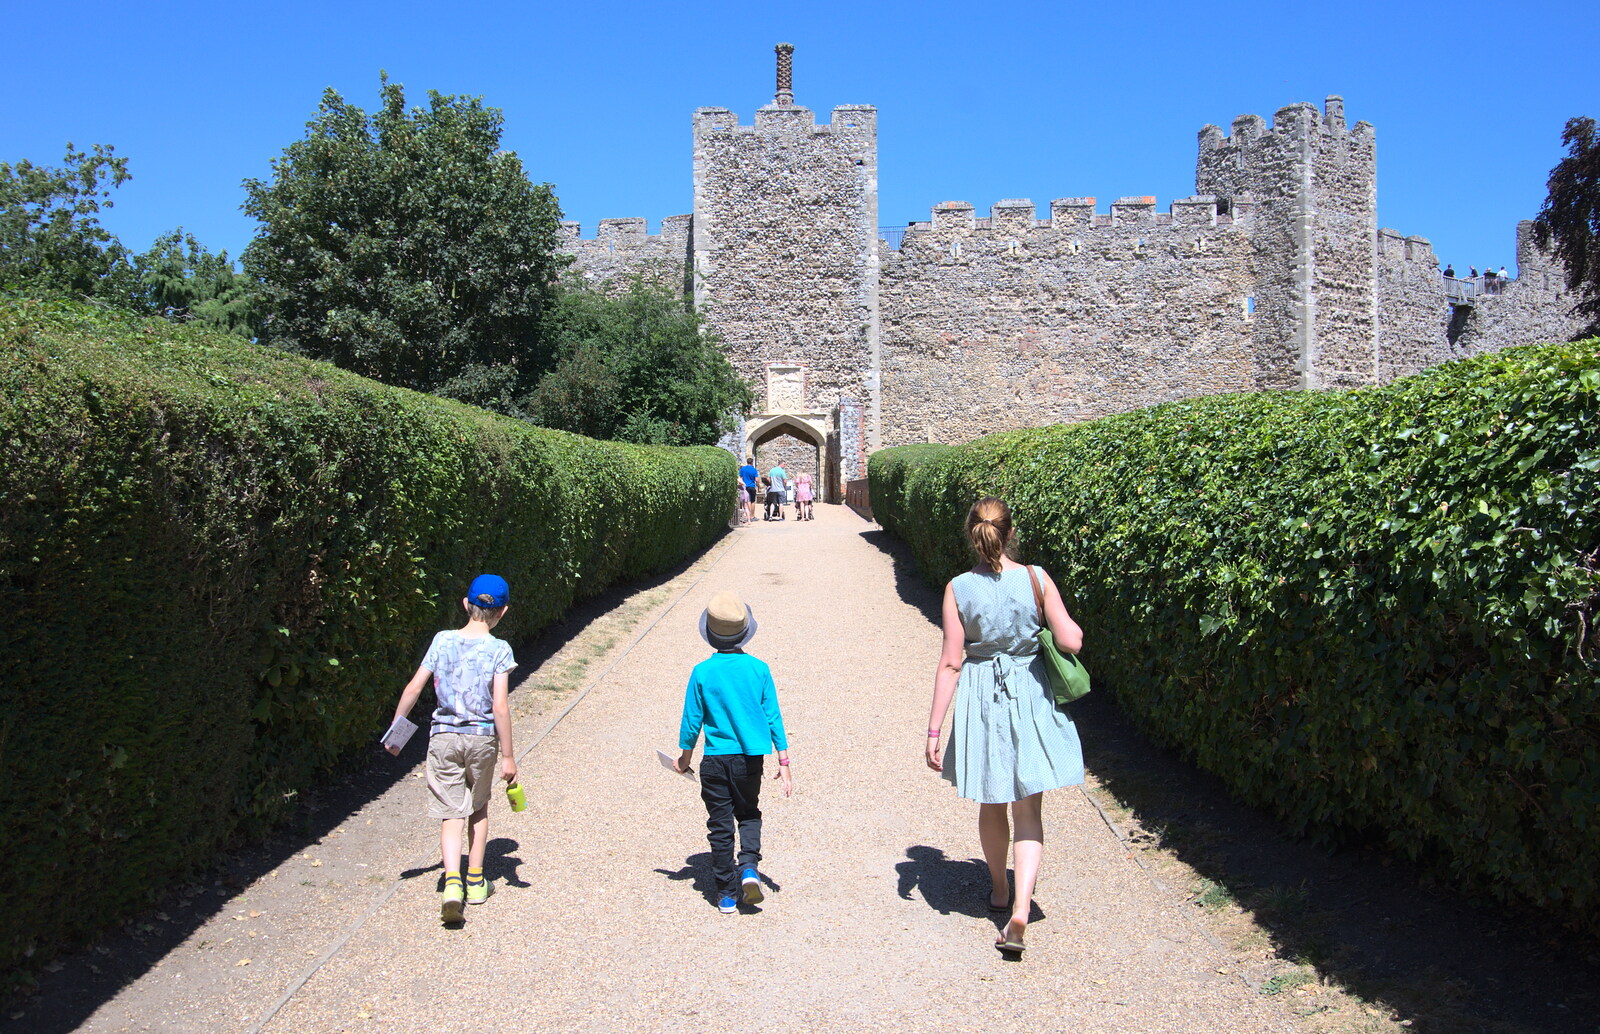 Heading to the castle entrance from A Postcard from the Castle on the Hill, Framlingham, Suffolk - 14th July 2018